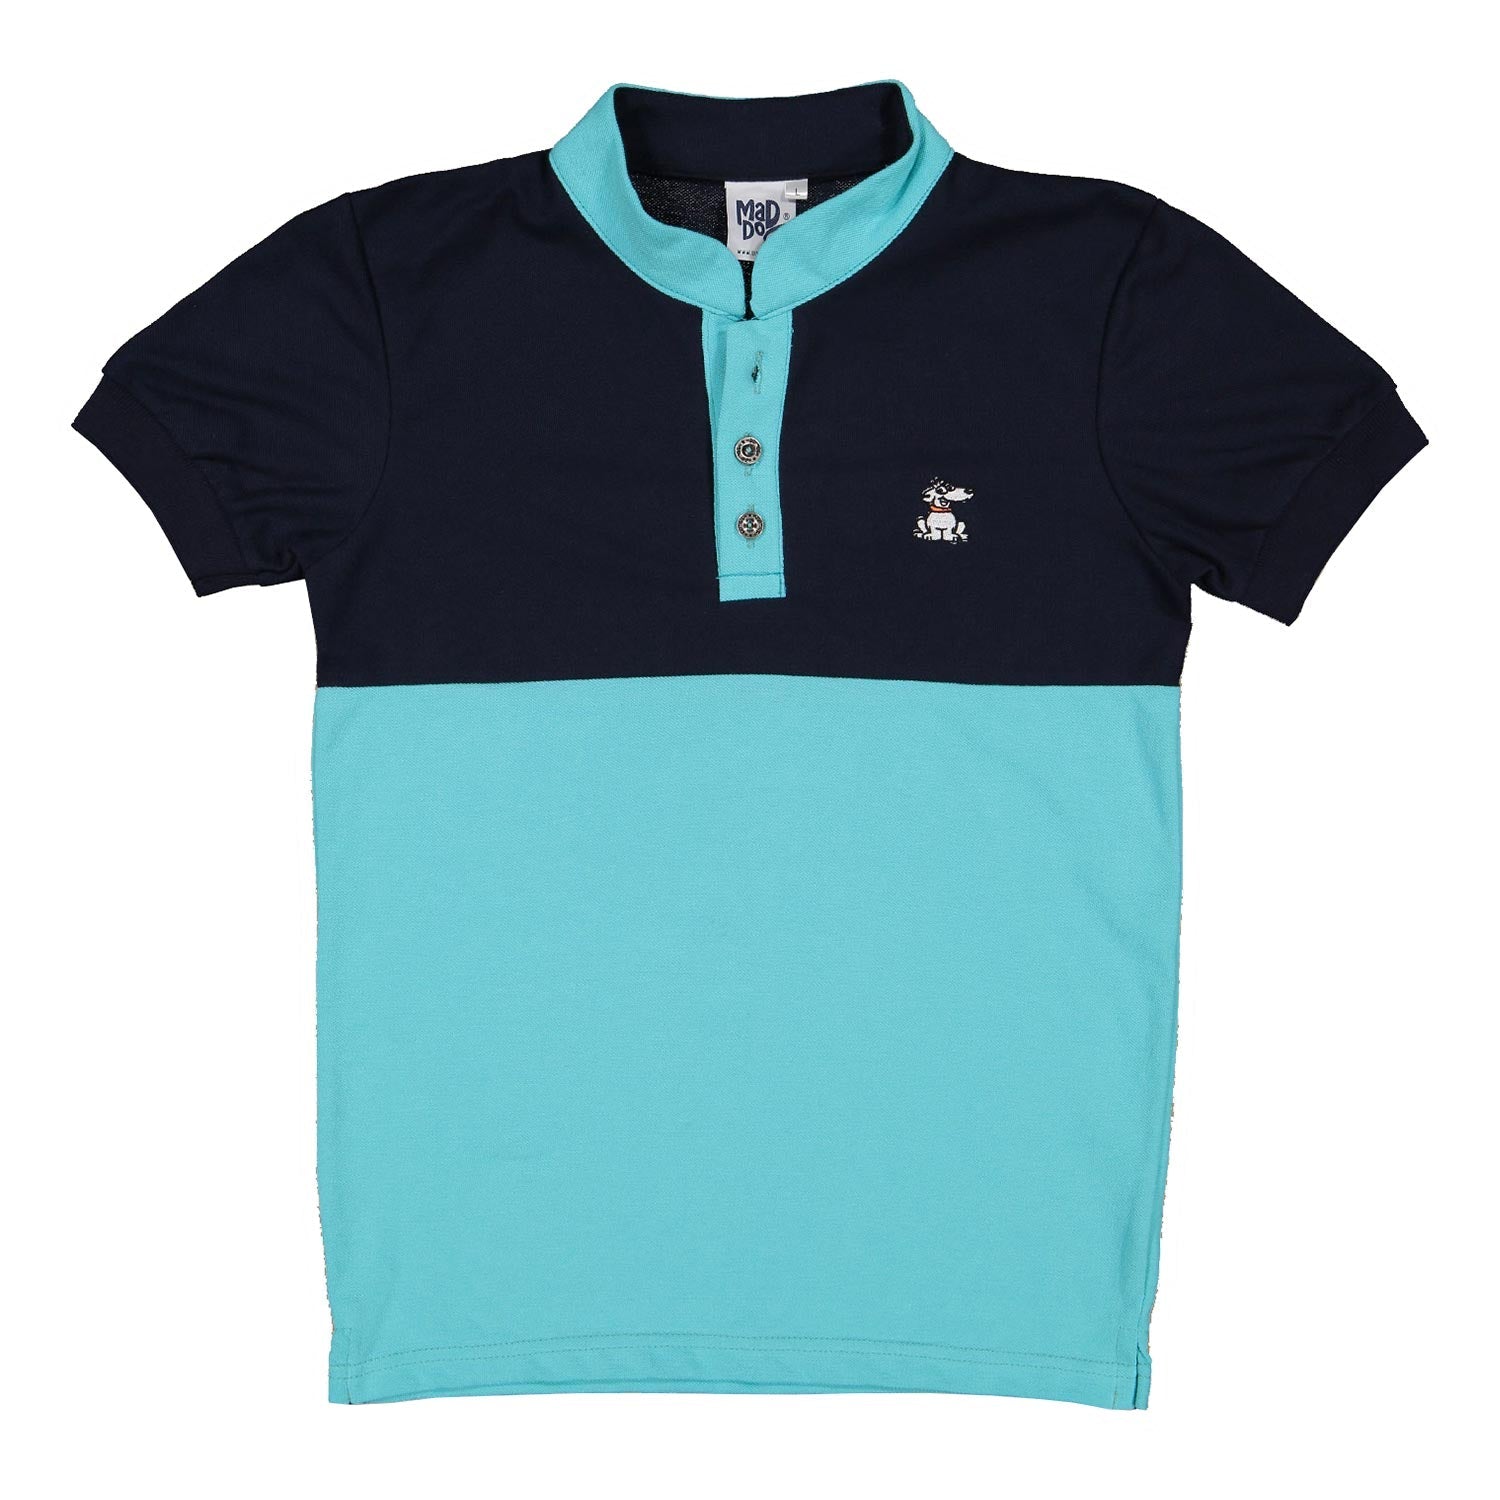 Mad Dogs Turquoise & Navy Elite Girls Polo Shirt Kids Tops Mad Dogs 